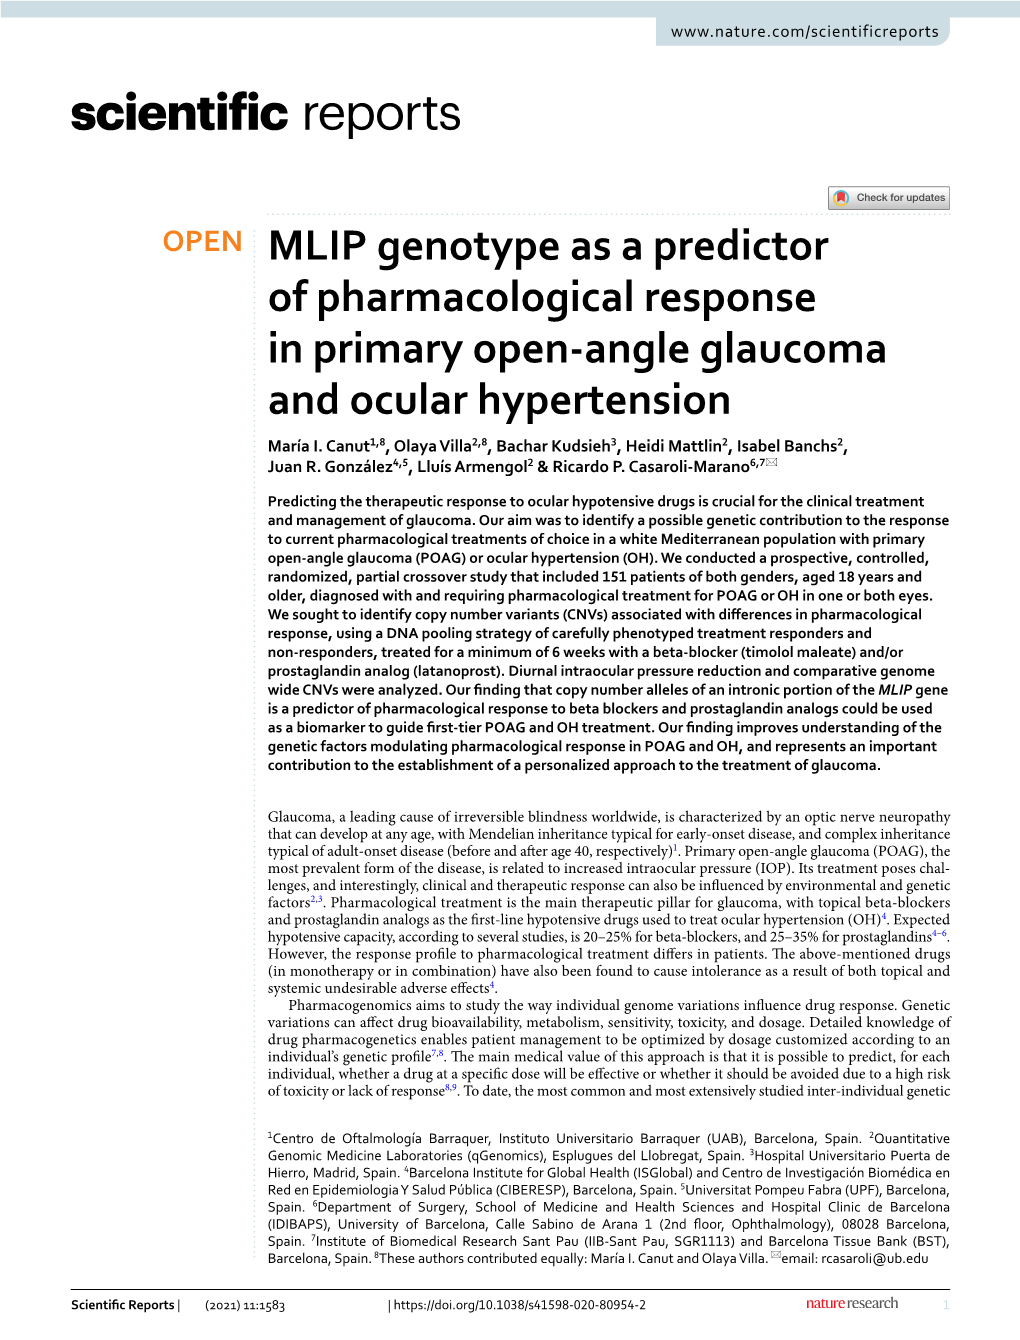 MLIP Genotype As a Predictor of Pharmacological Response in Primary Open‑Angle Glaucoma and Ocular Hypertension María I